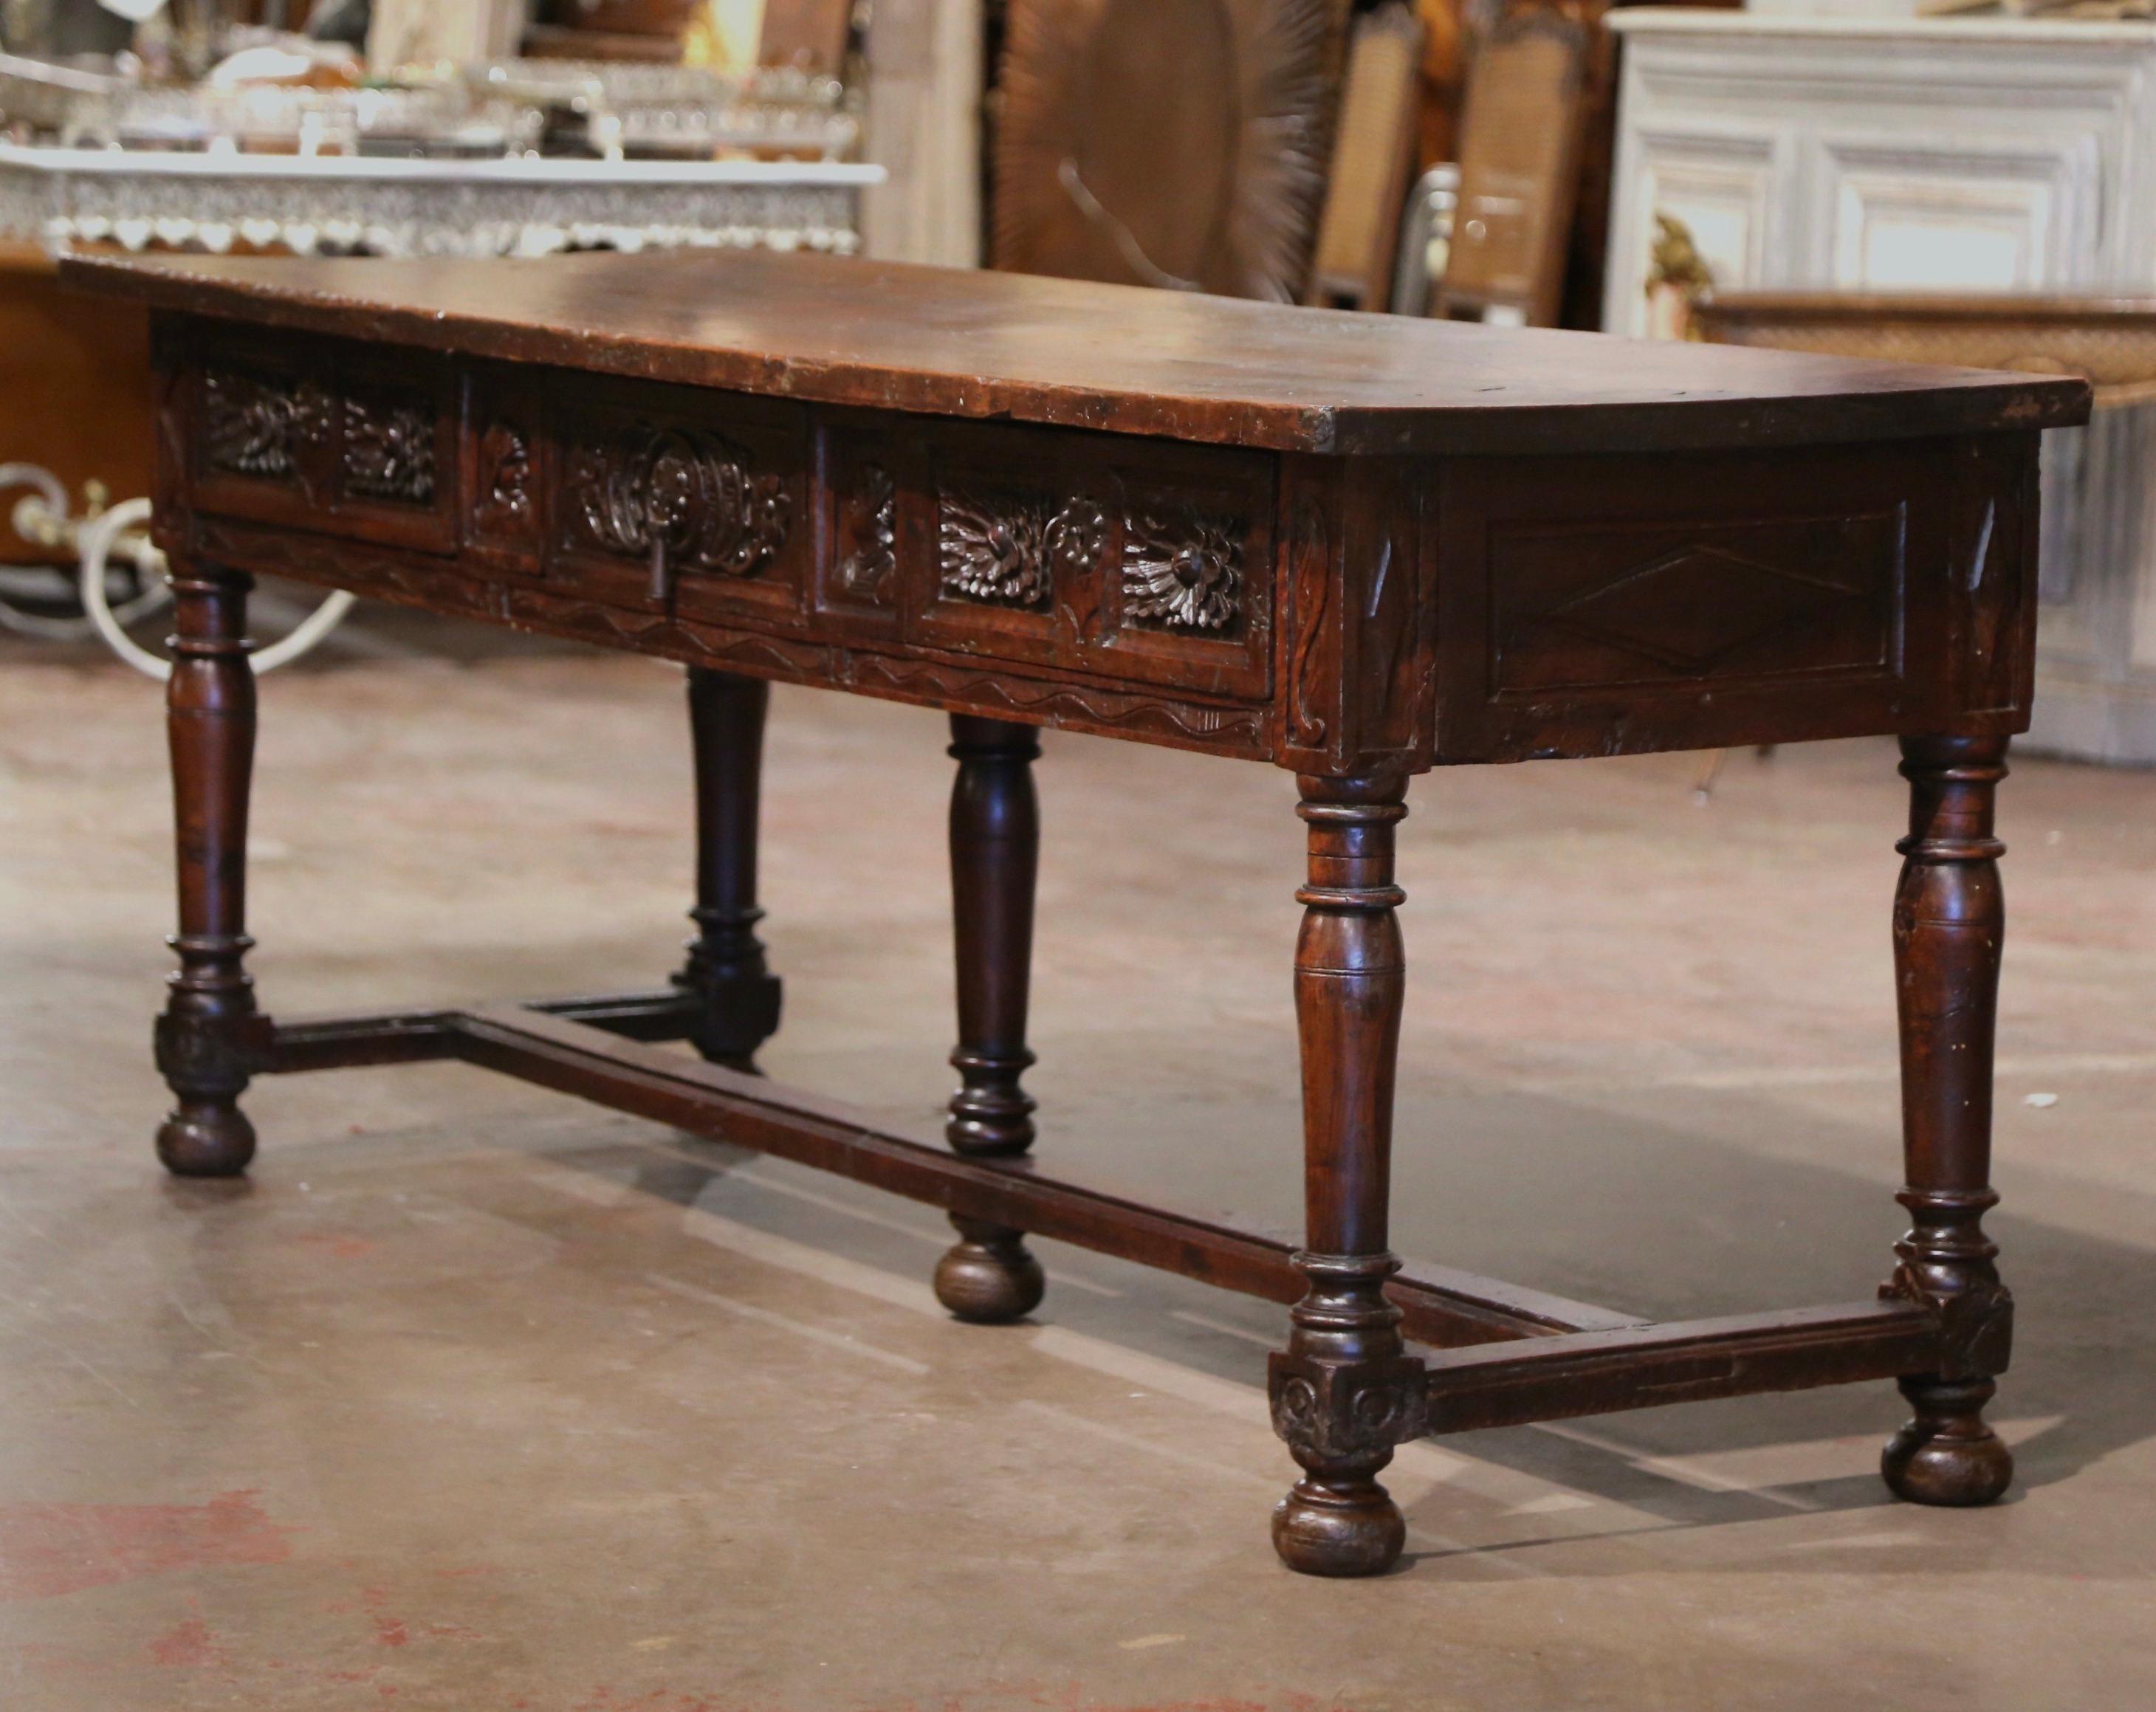 This elegant antique fruitwood console was crafted in Spain, circa 1680. Hand carved on all four sides, the long sofa table stands on five thick turned legs ending with bun feet over a bottom stretcher at the base. The console features a single